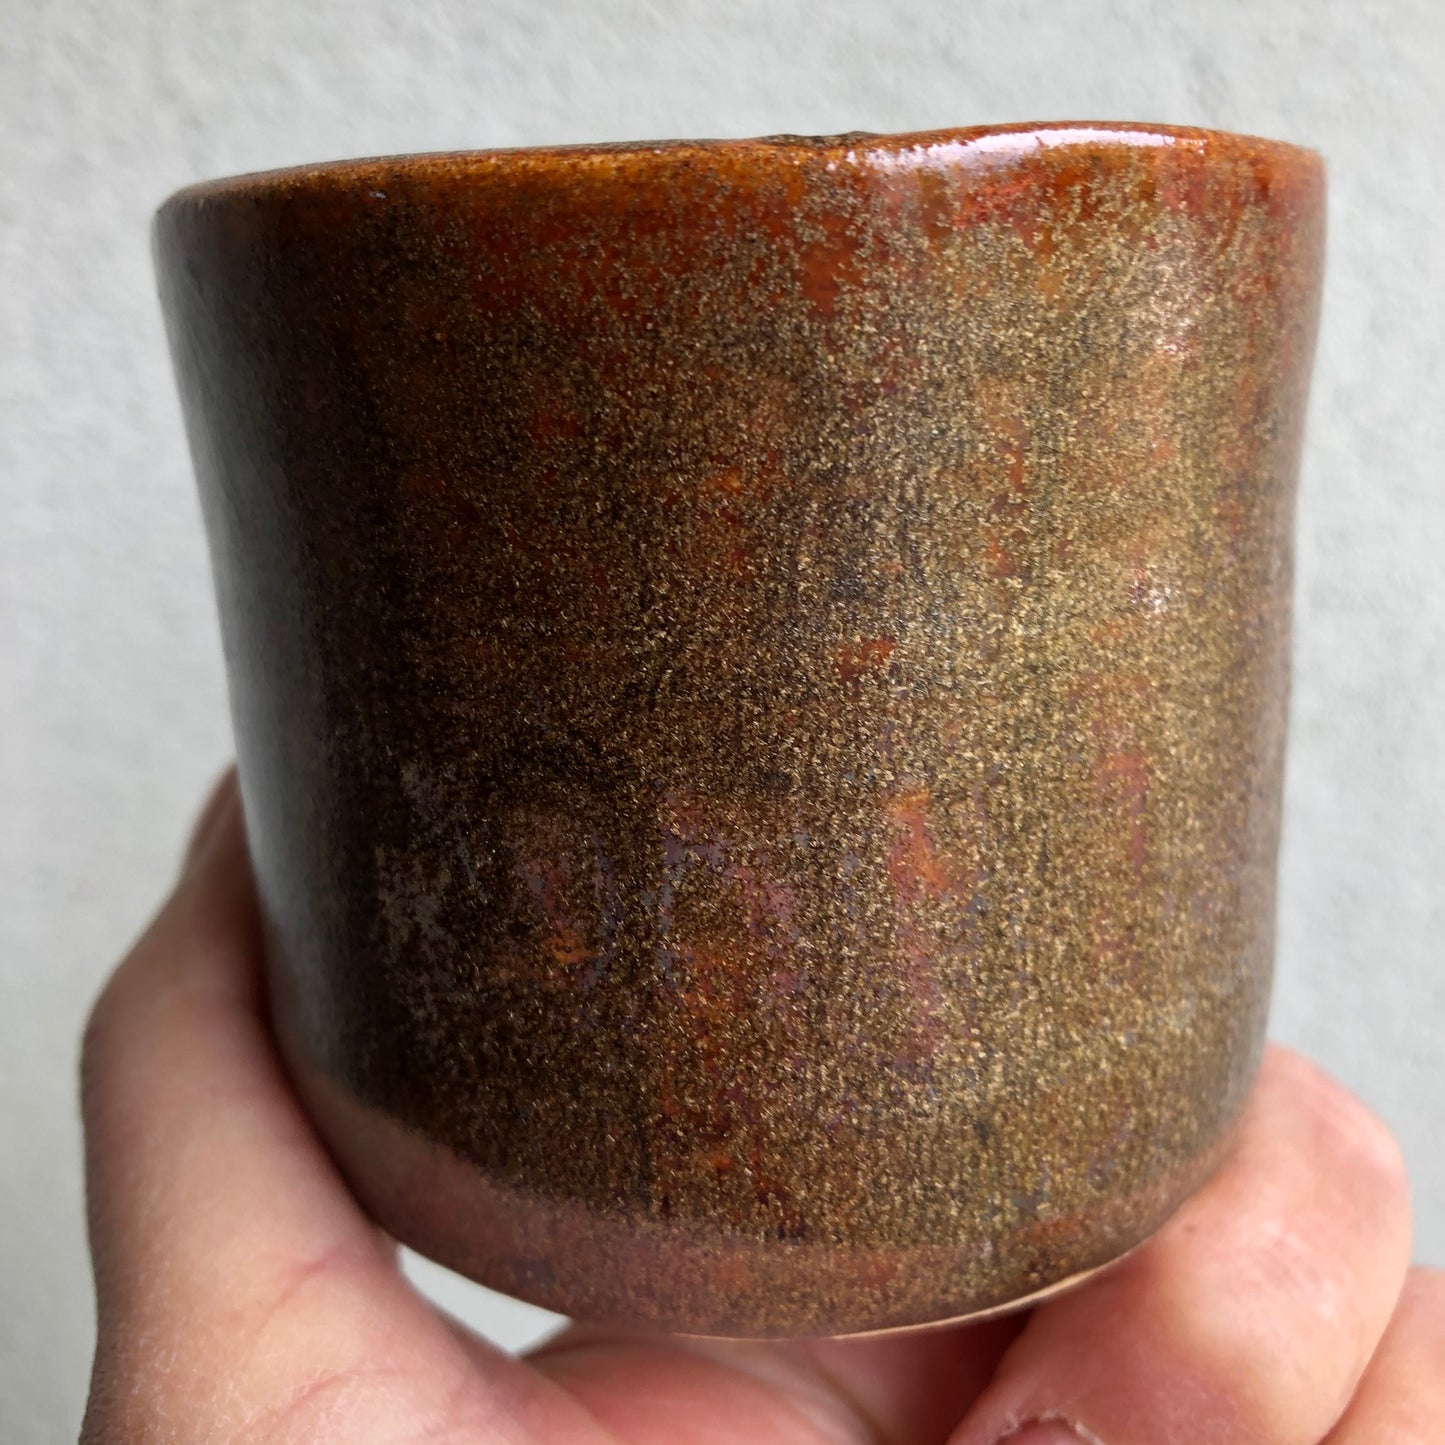 Beautifully glazed cup